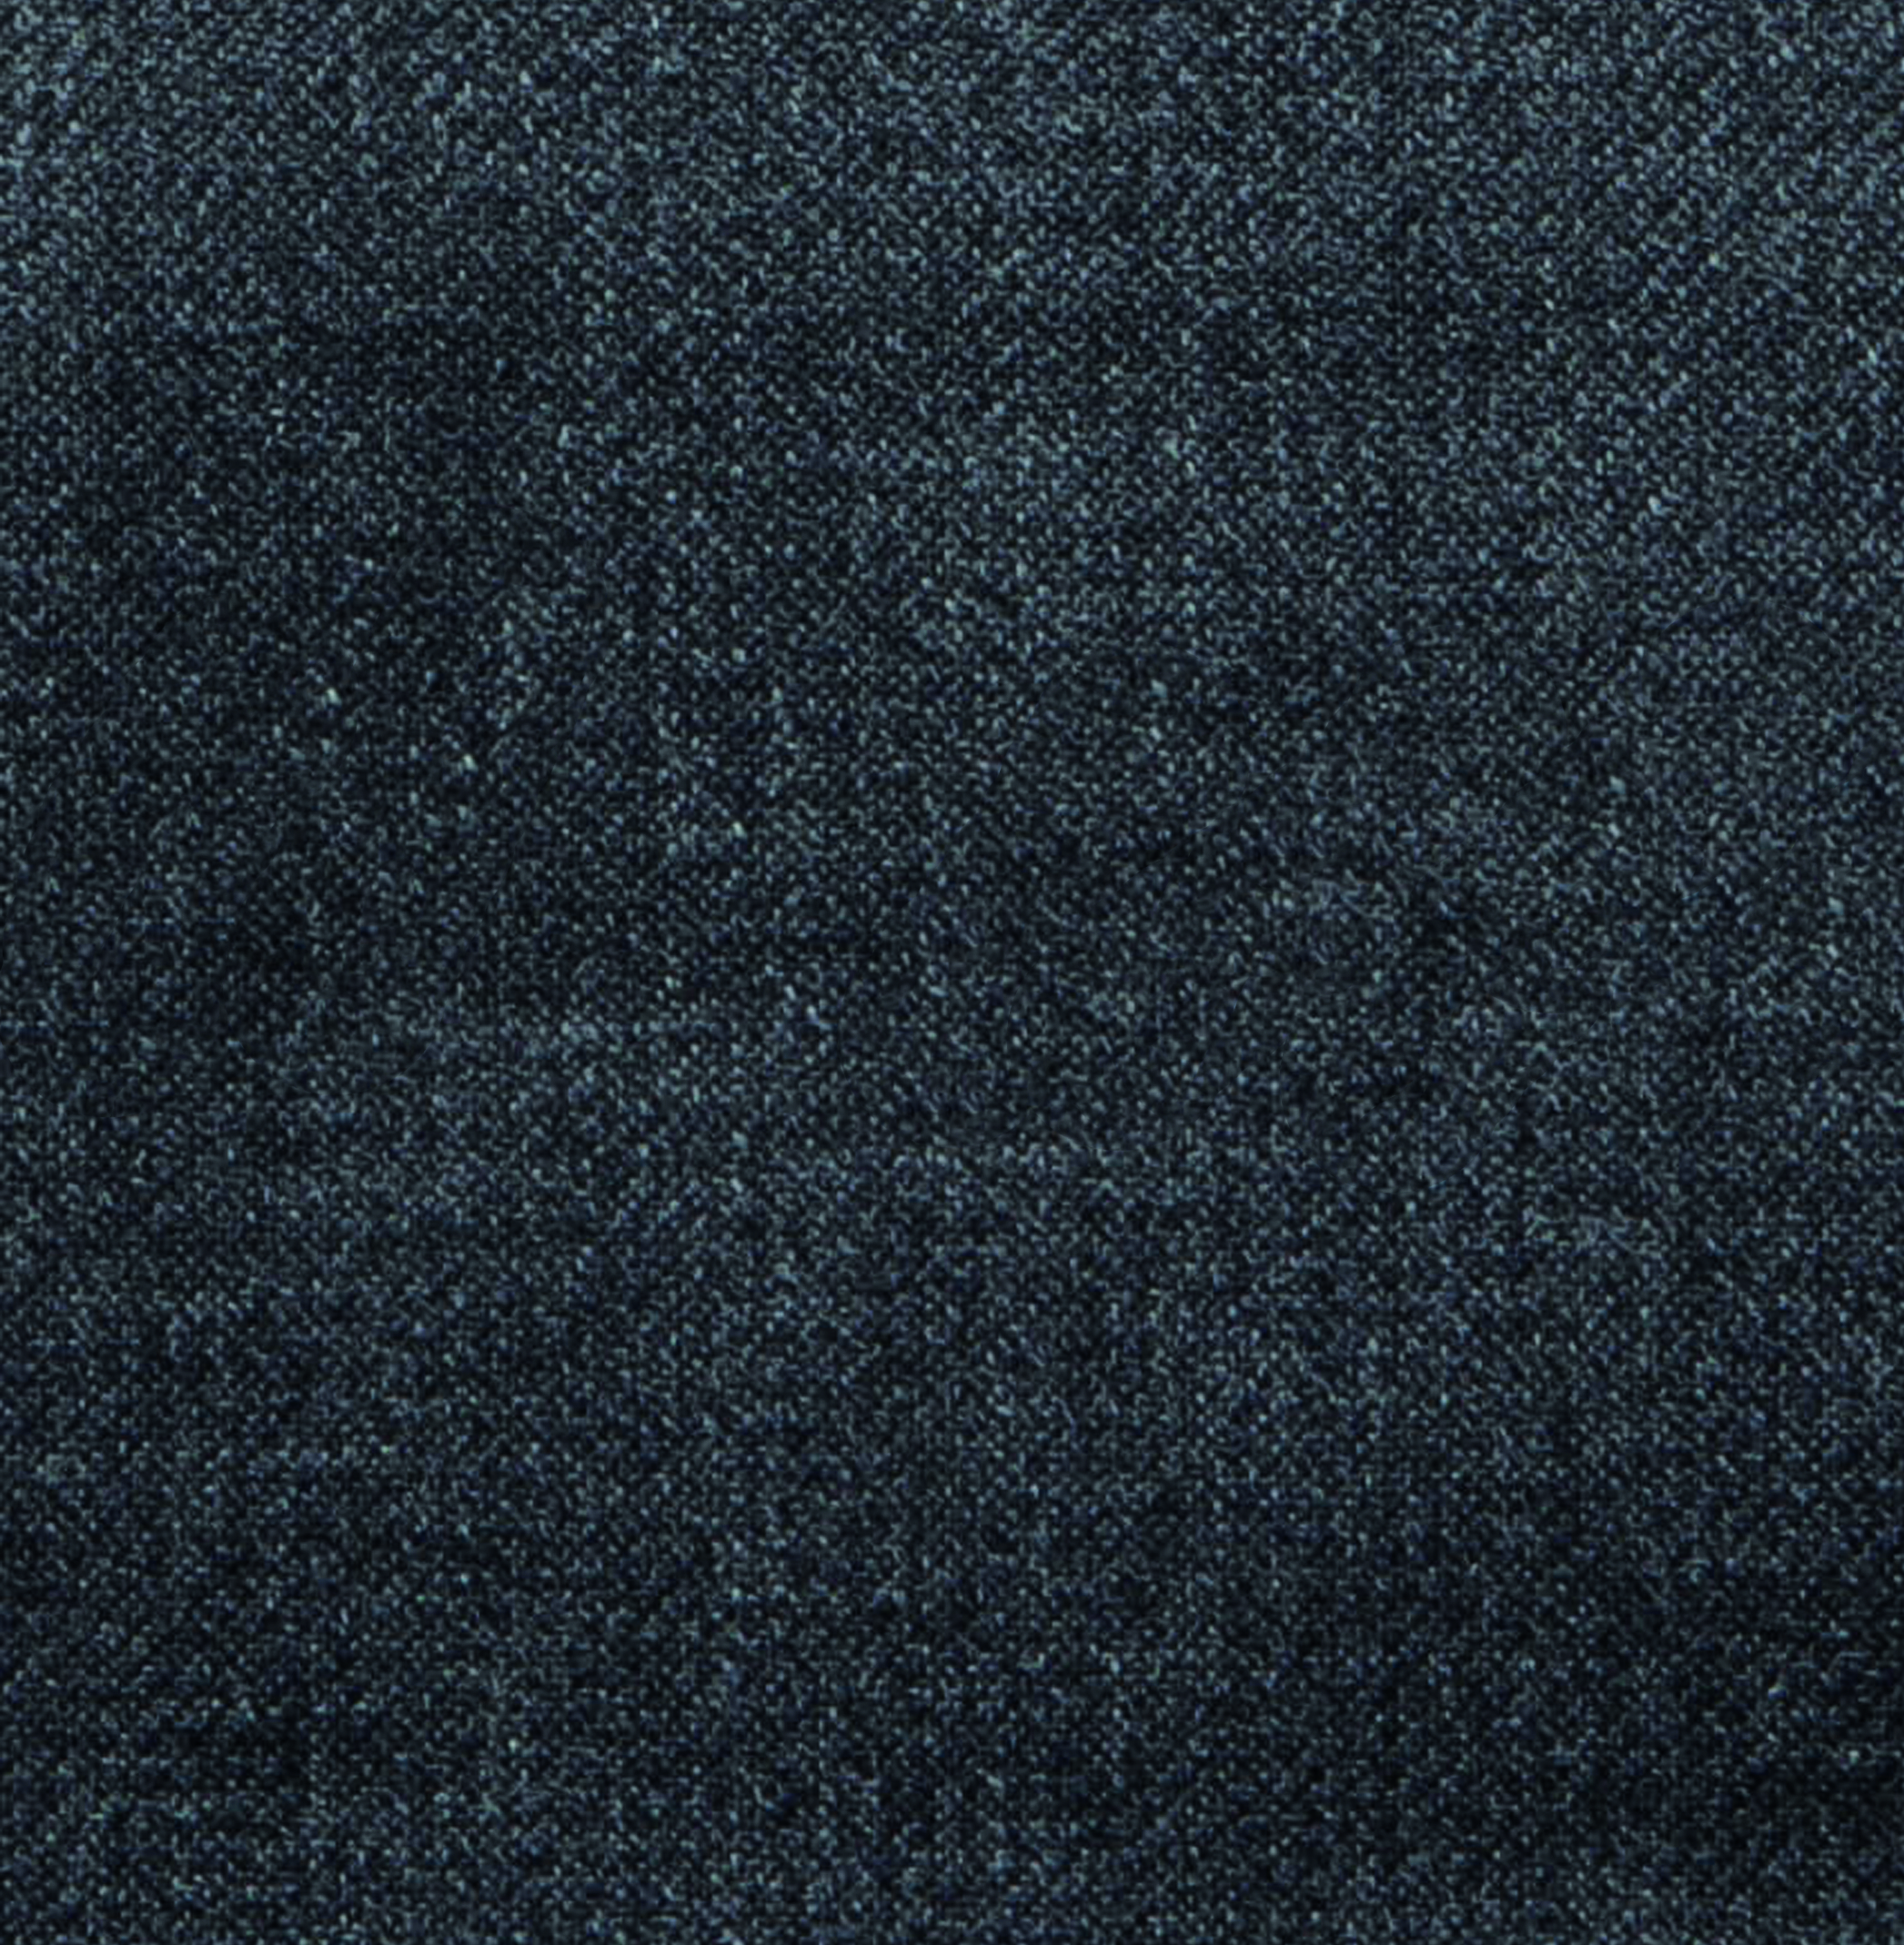 Buy tailor made shirts online - Luxurious Pure New Wool - Dark Grey No lining